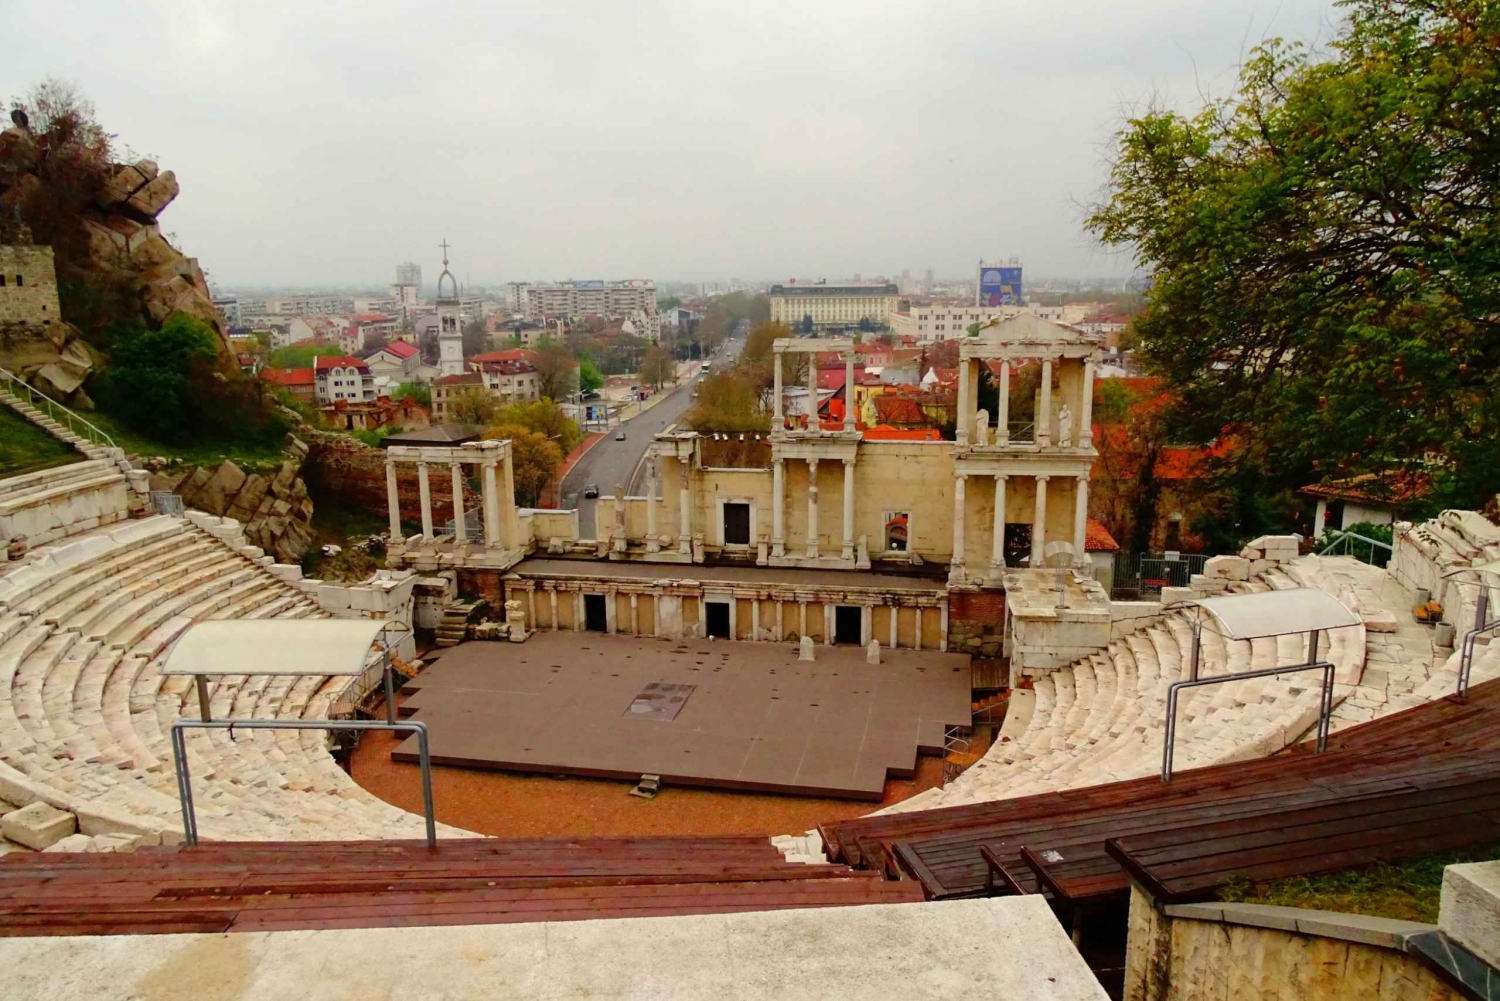 From Sofia: Europe's Oldest City, Plovdiv with audio guide